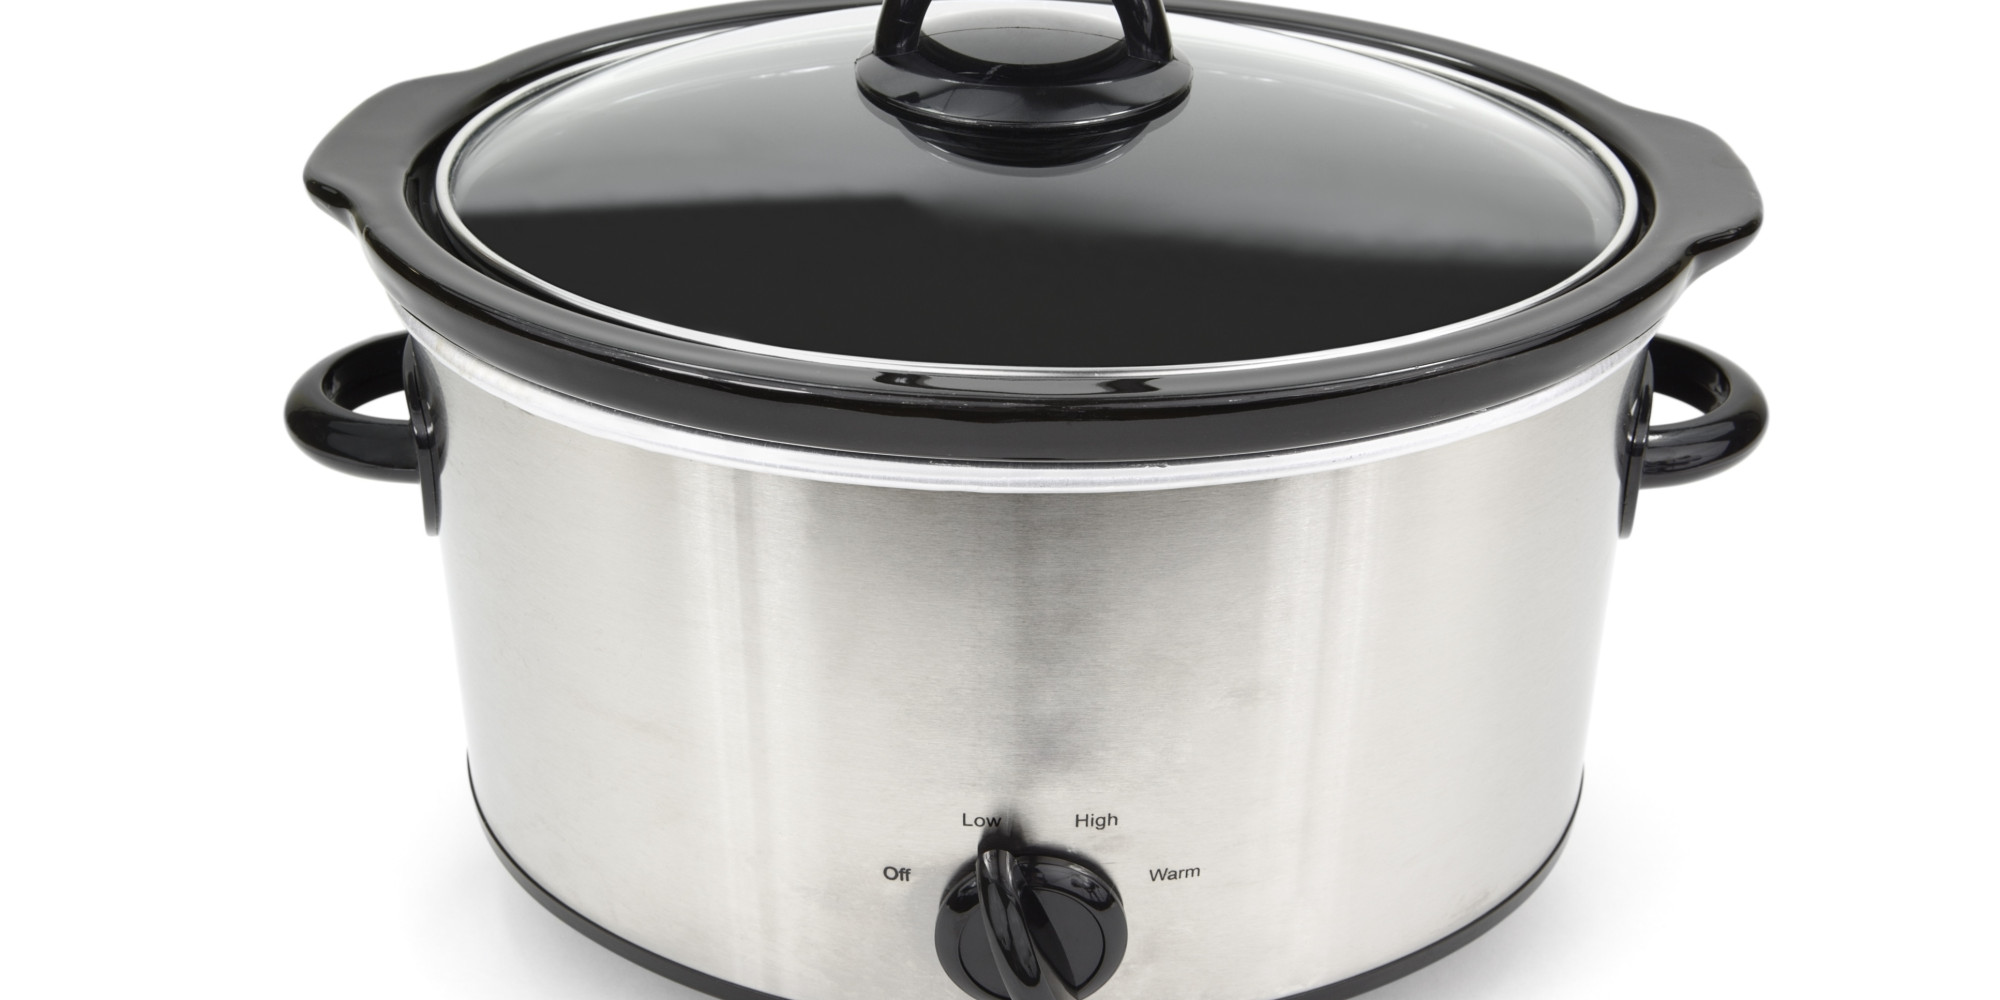 Brief History Of The Crock Pot The Original Slow Cooker